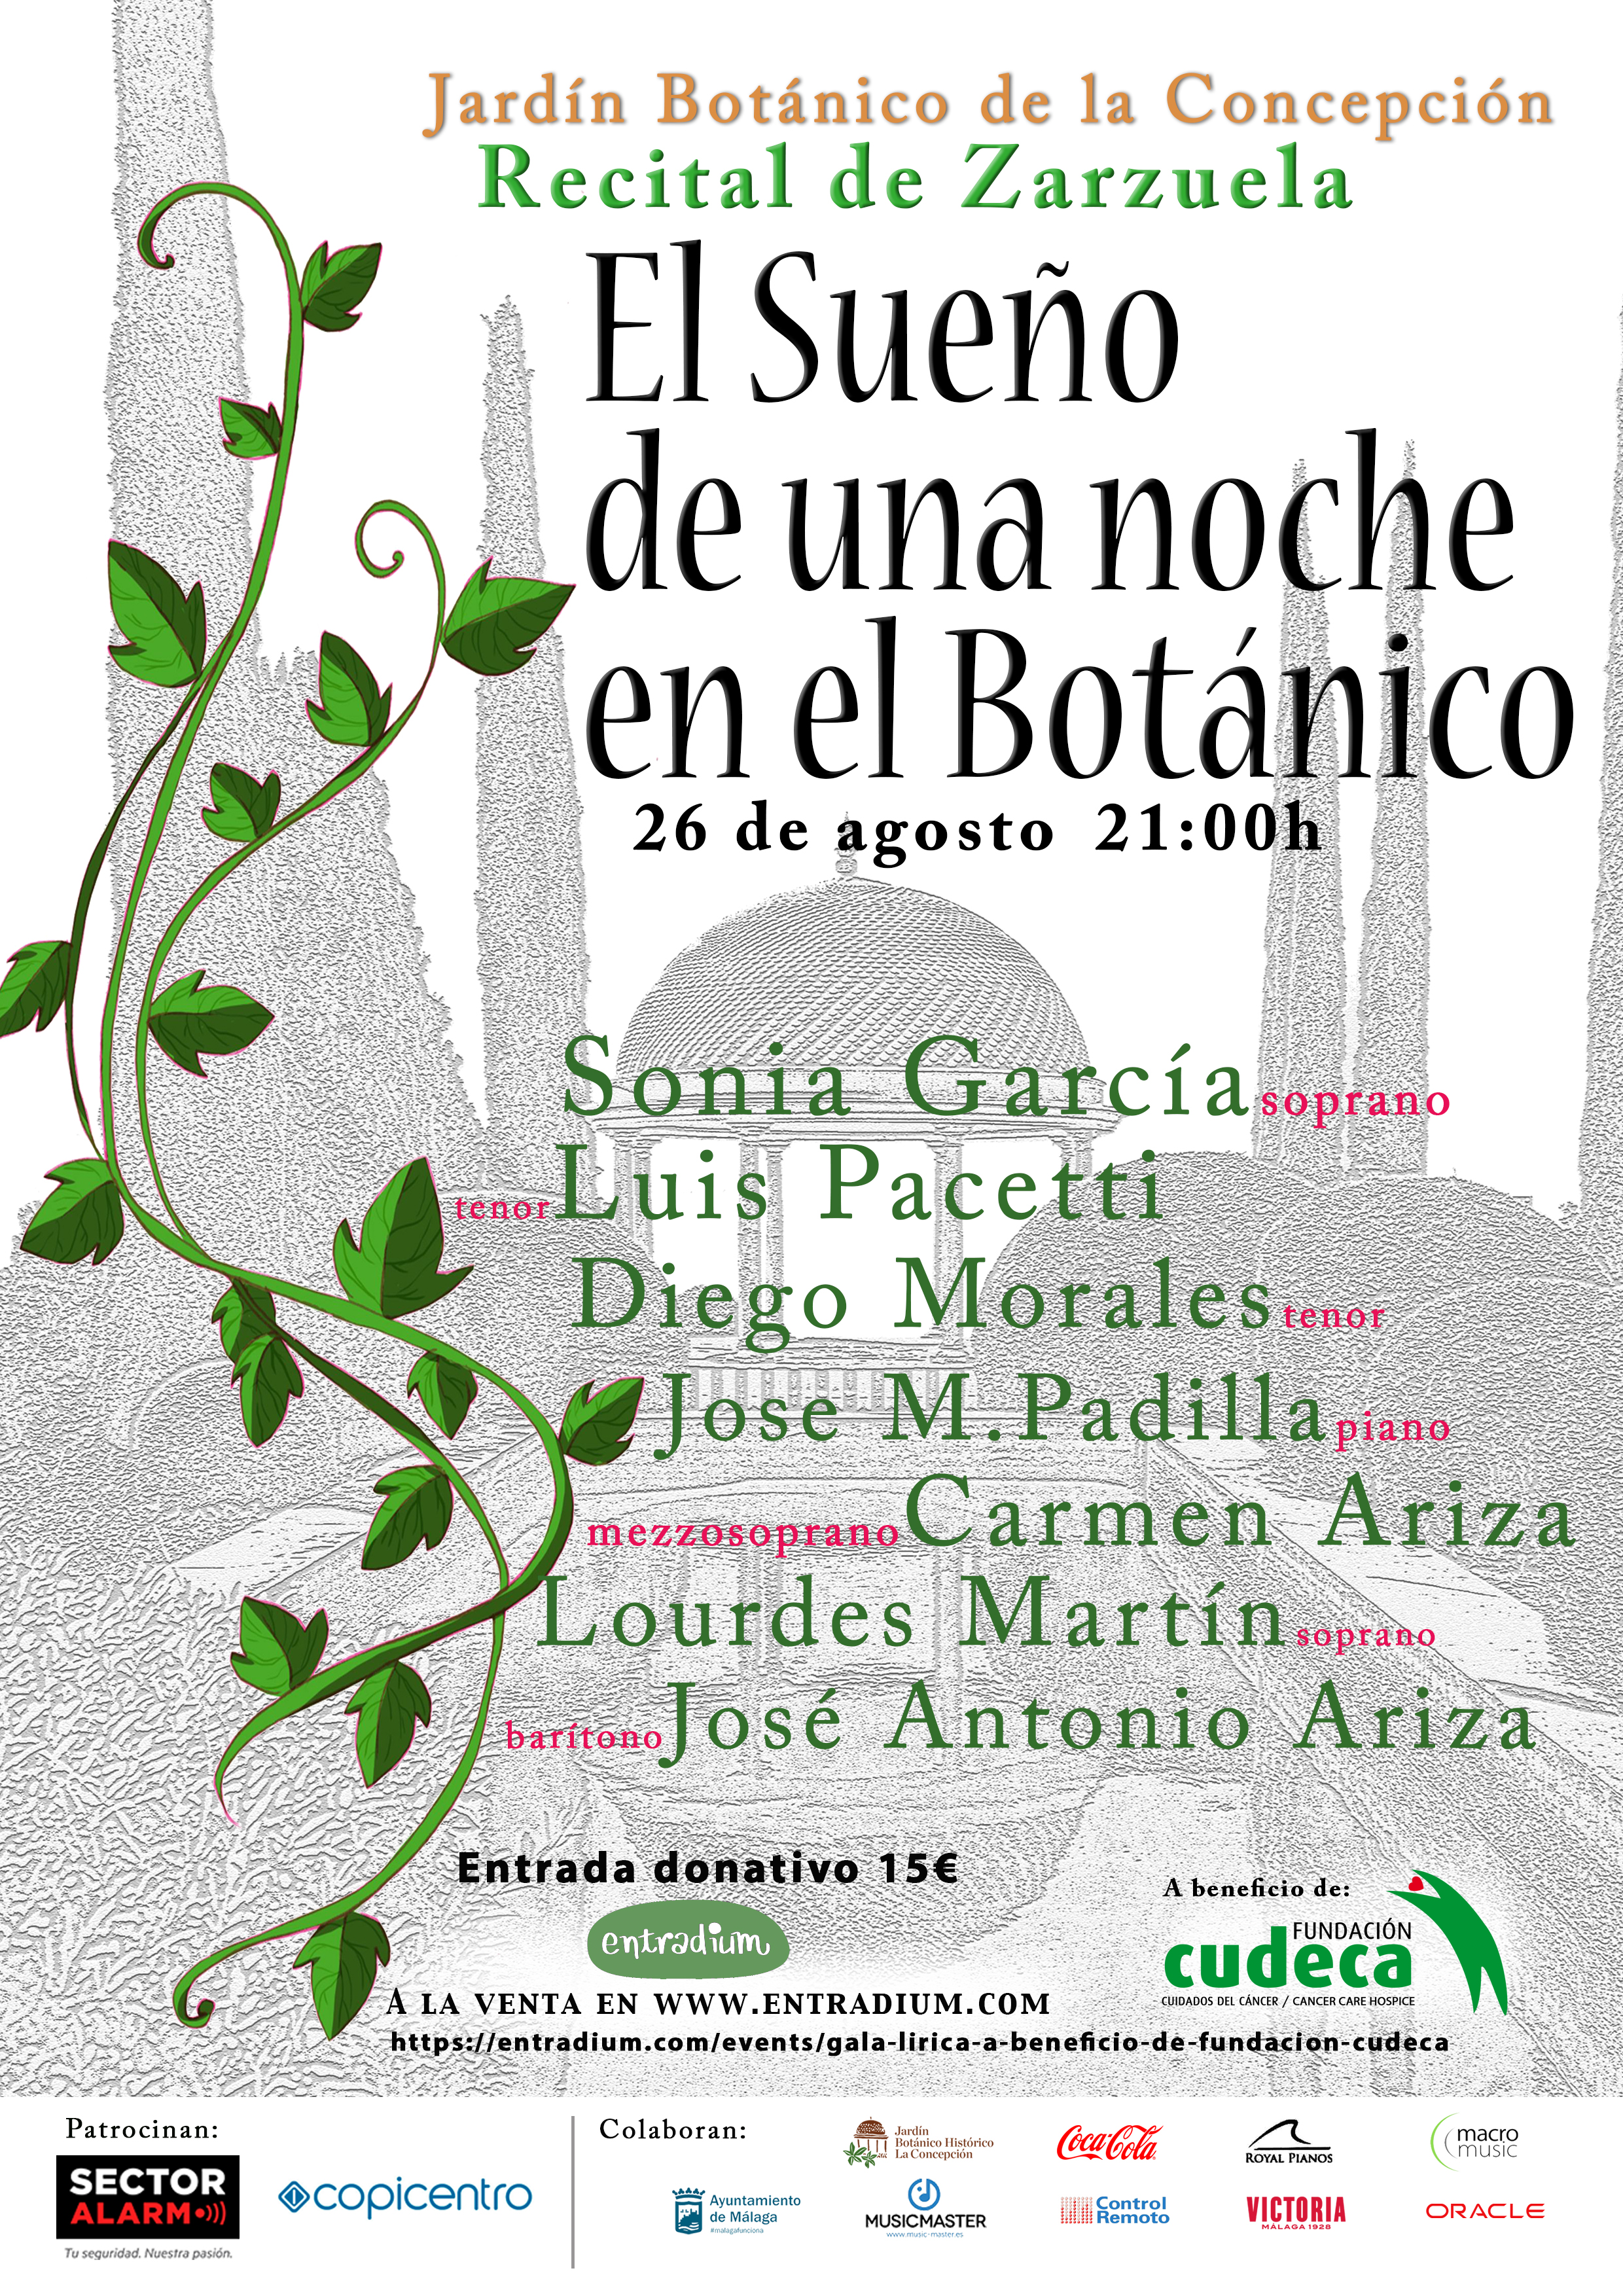 “A Night’s Dream at the Botanical Garden” in aid of CUDECA